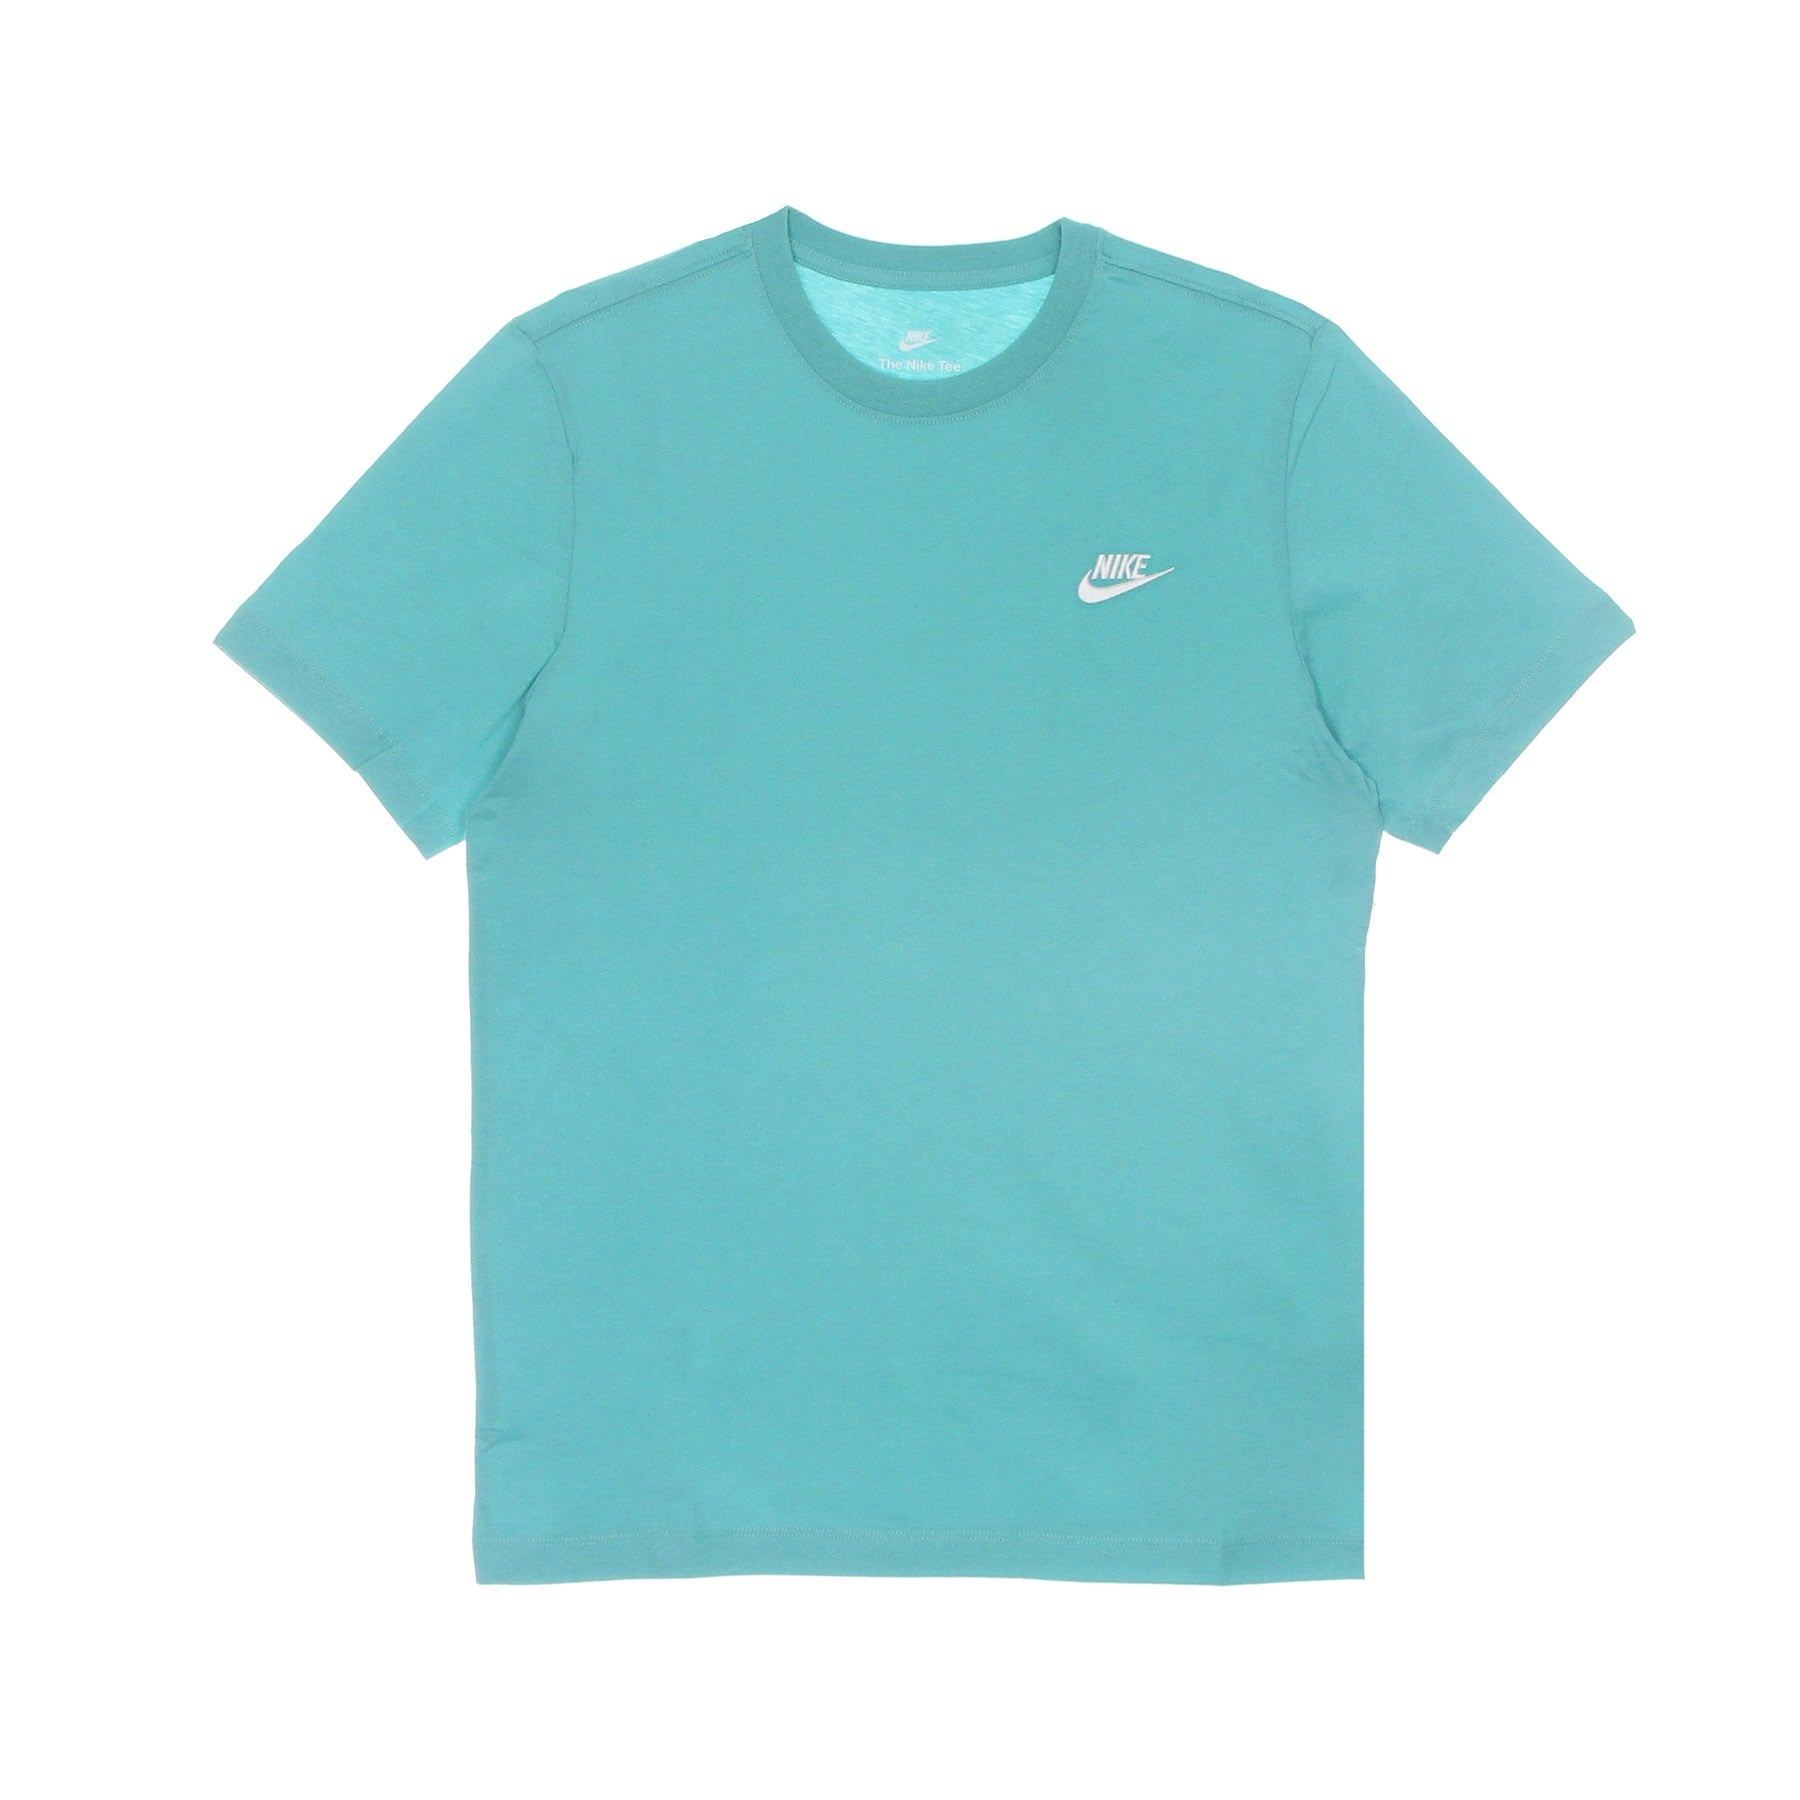 Men's Club Tee Washed Teal/white T-shirt